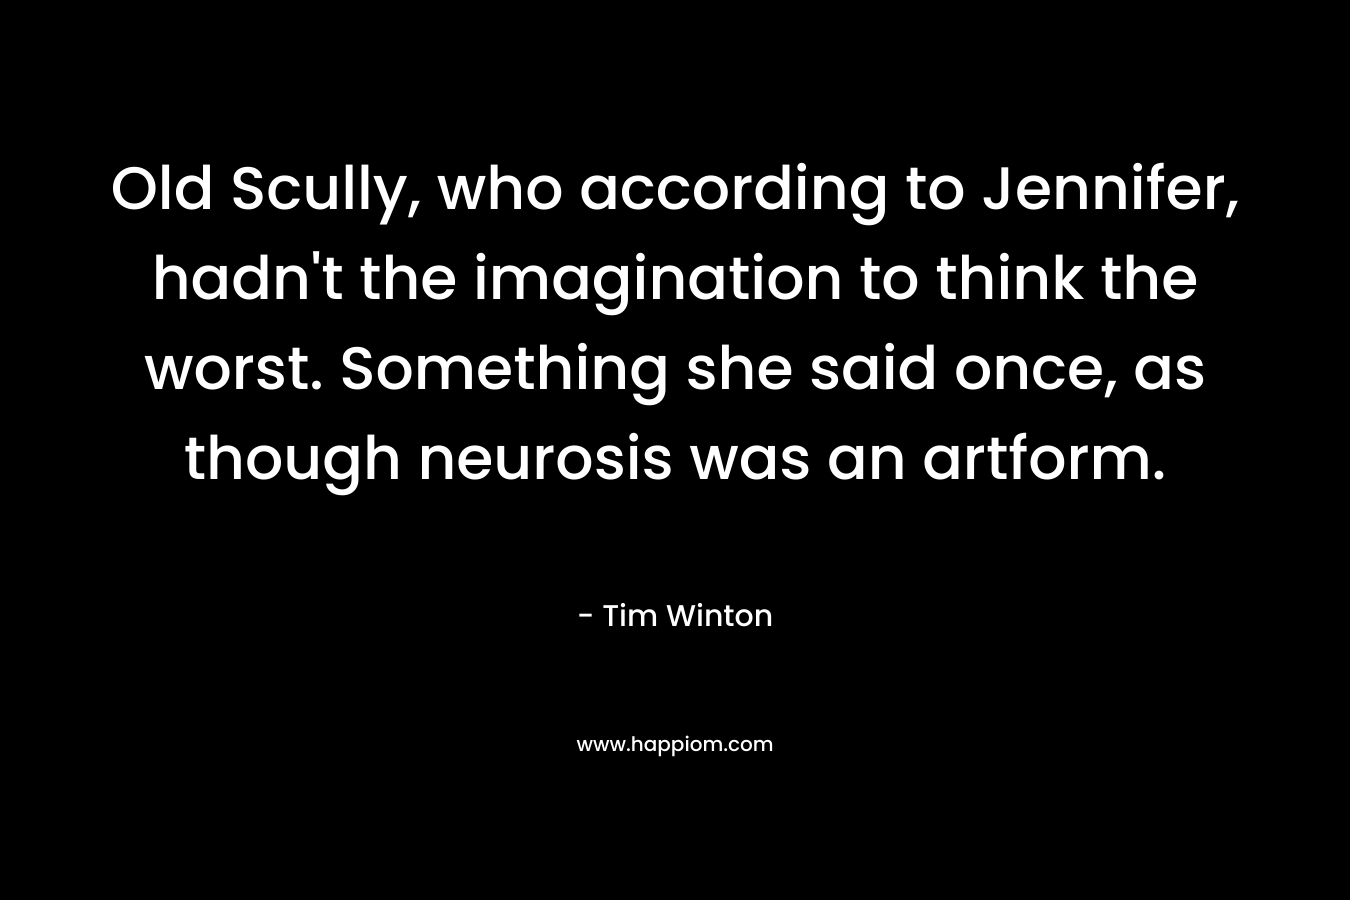 Old Scully, who according to Jennifer, hadn’t the imagination to think the worst. Something she said once, as though neurosis was an artform. – Tim Winton